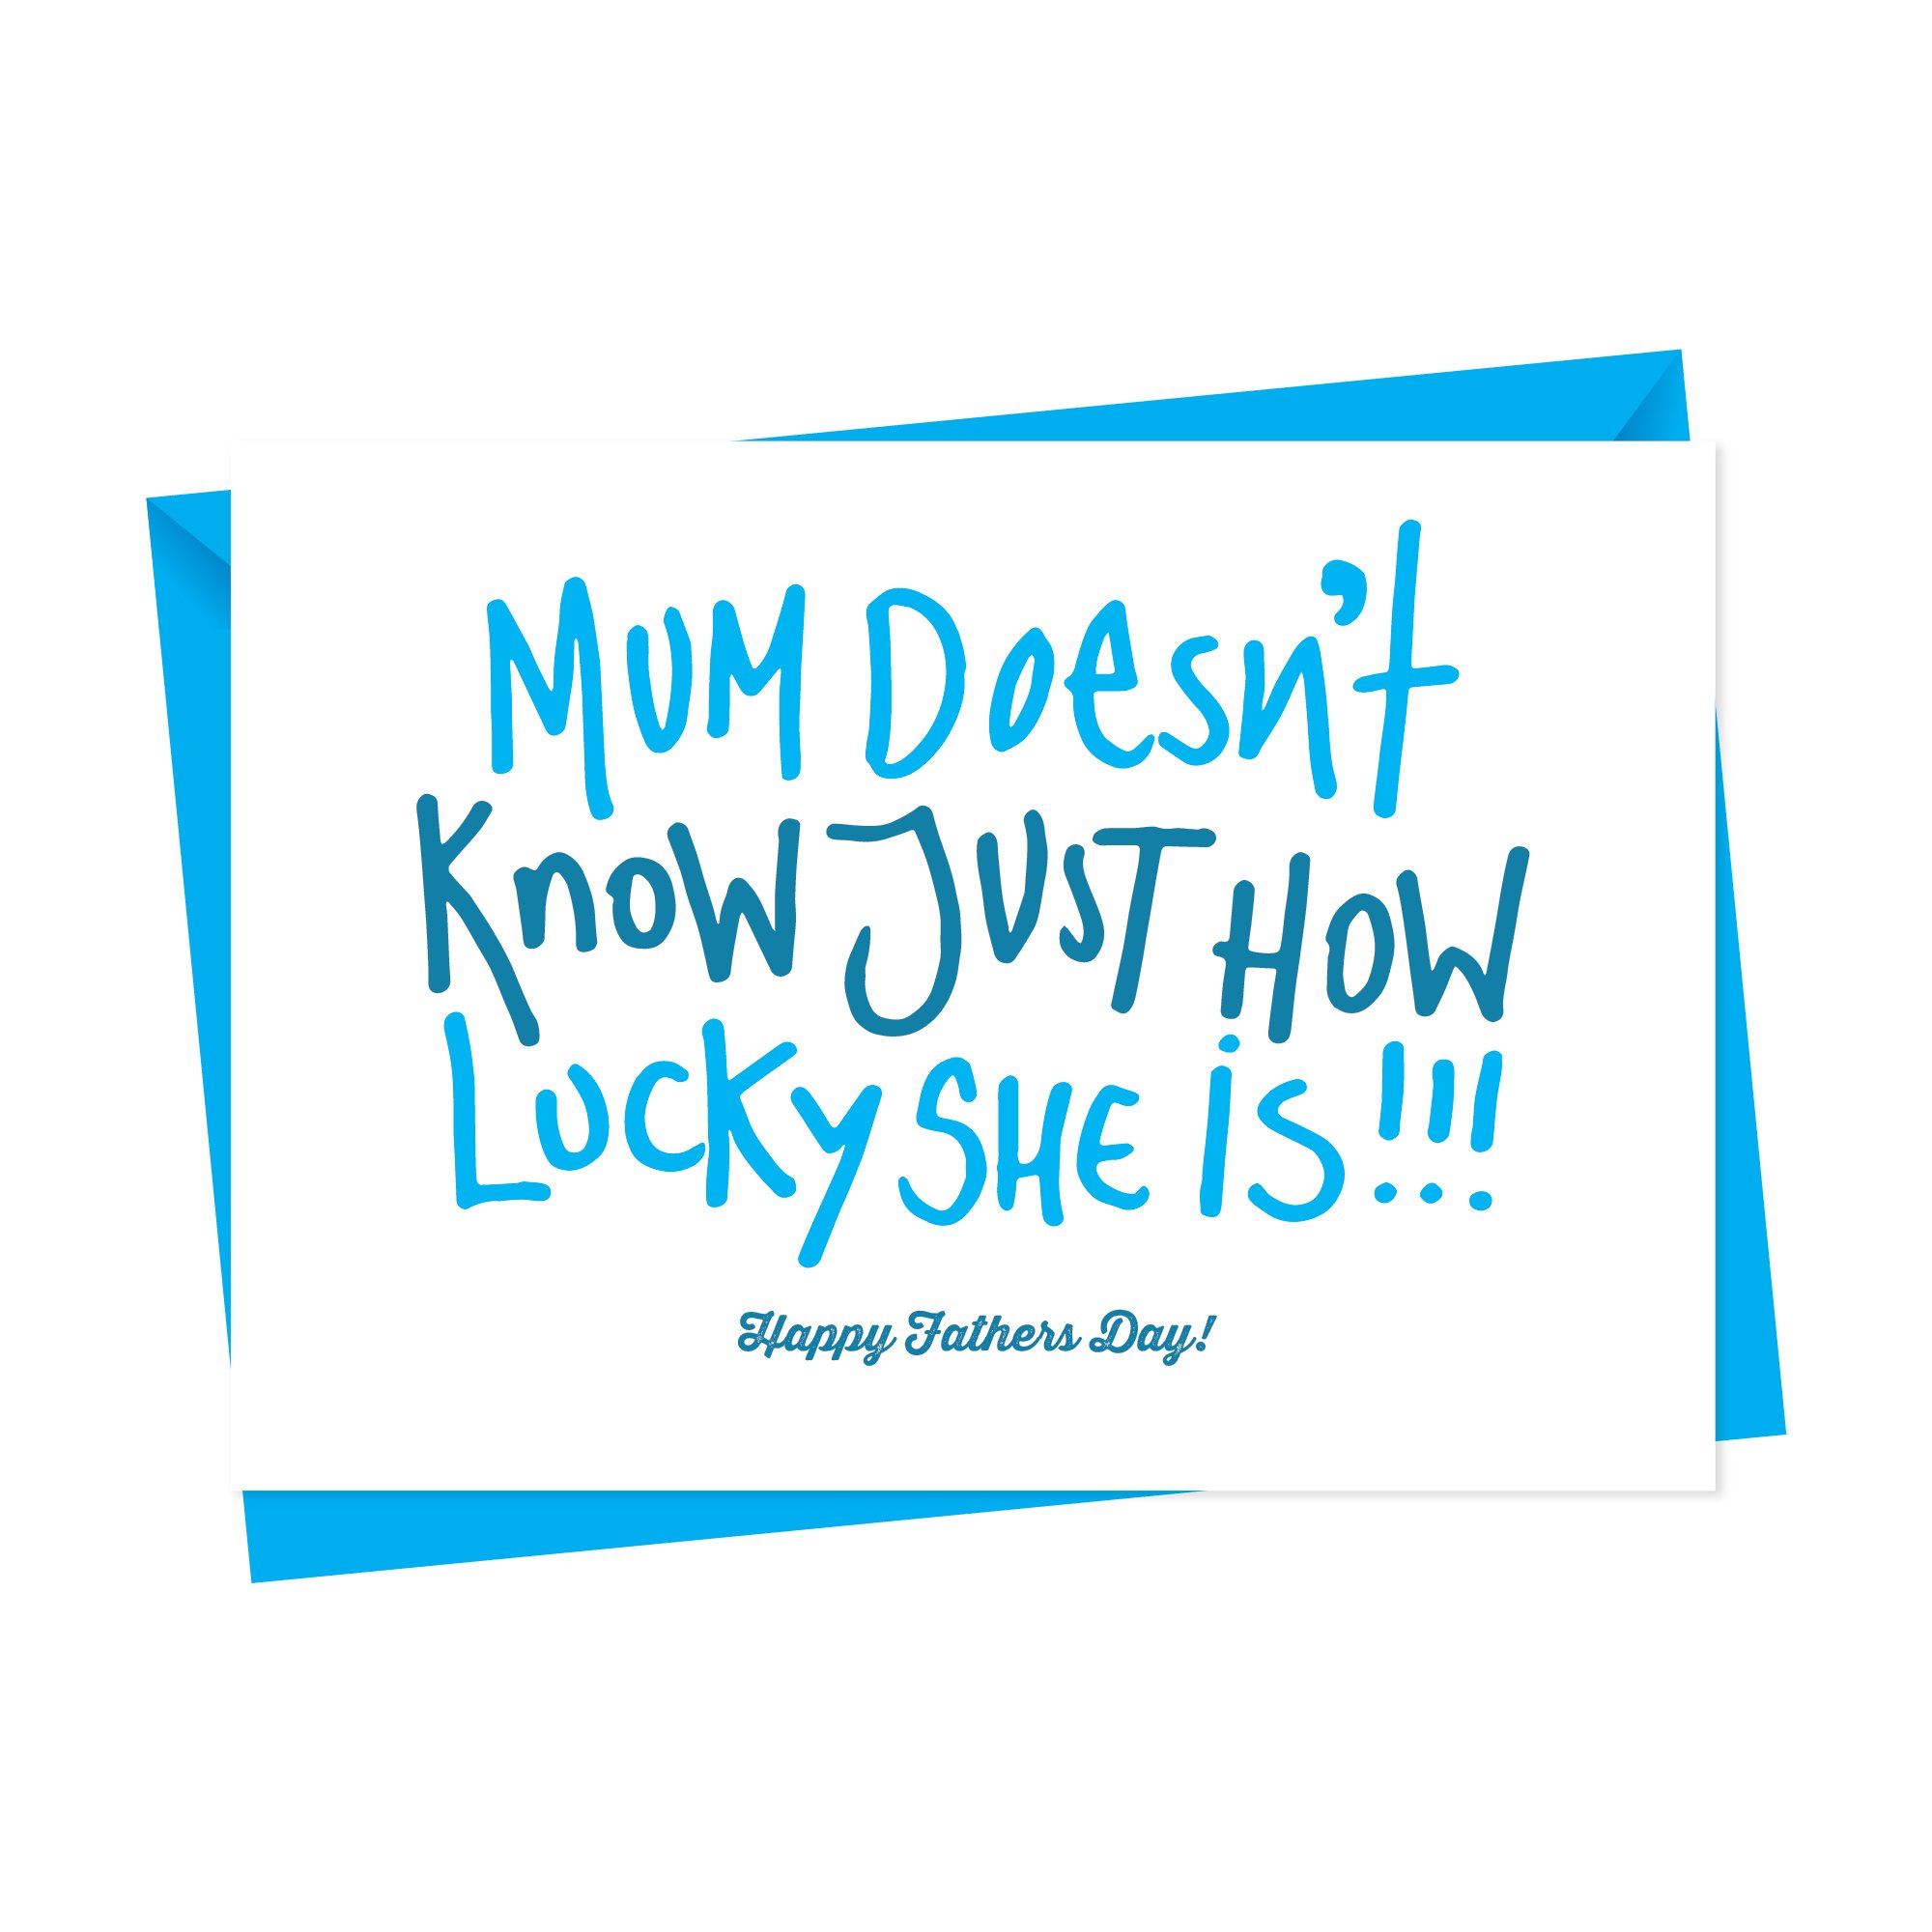 Mum does not know how lucky she is Card